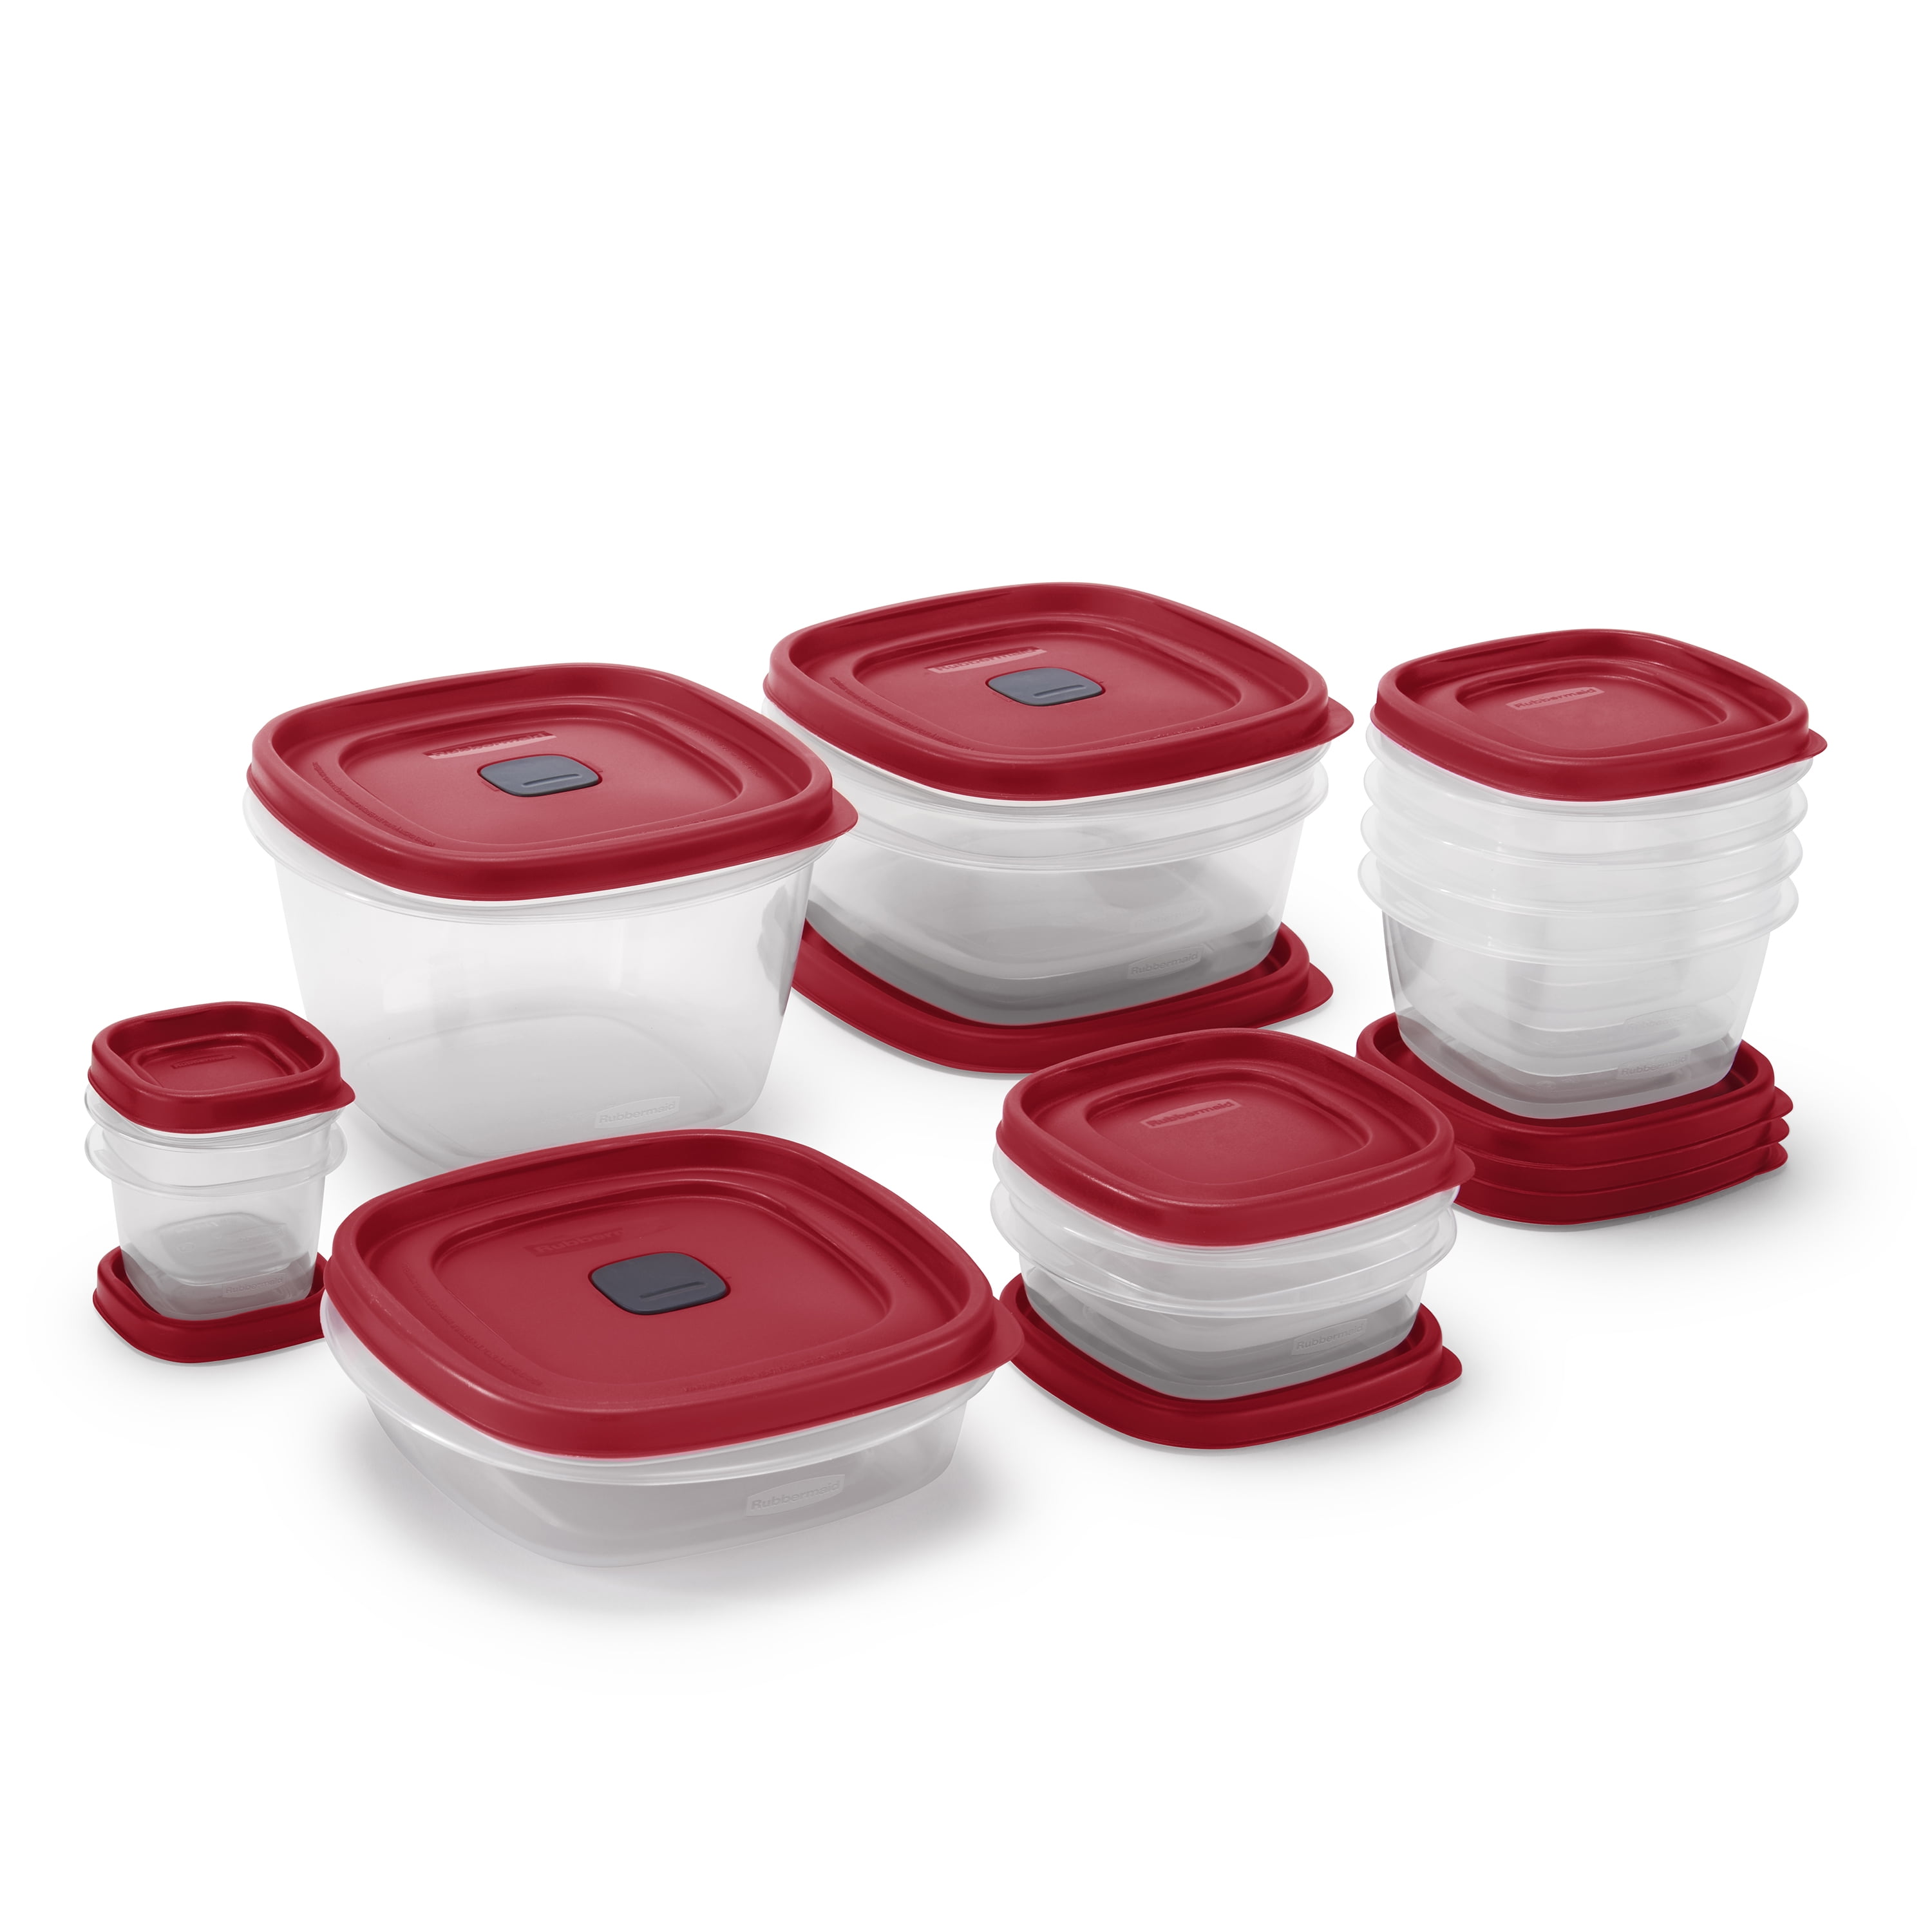 Rubbermaid Easy Find Vented Lids Food Storage, Set of 8 (16 Pieces Total),  8-Pack, Racer Red & Easy Find Vented Lids Food Storage Containers, Set of